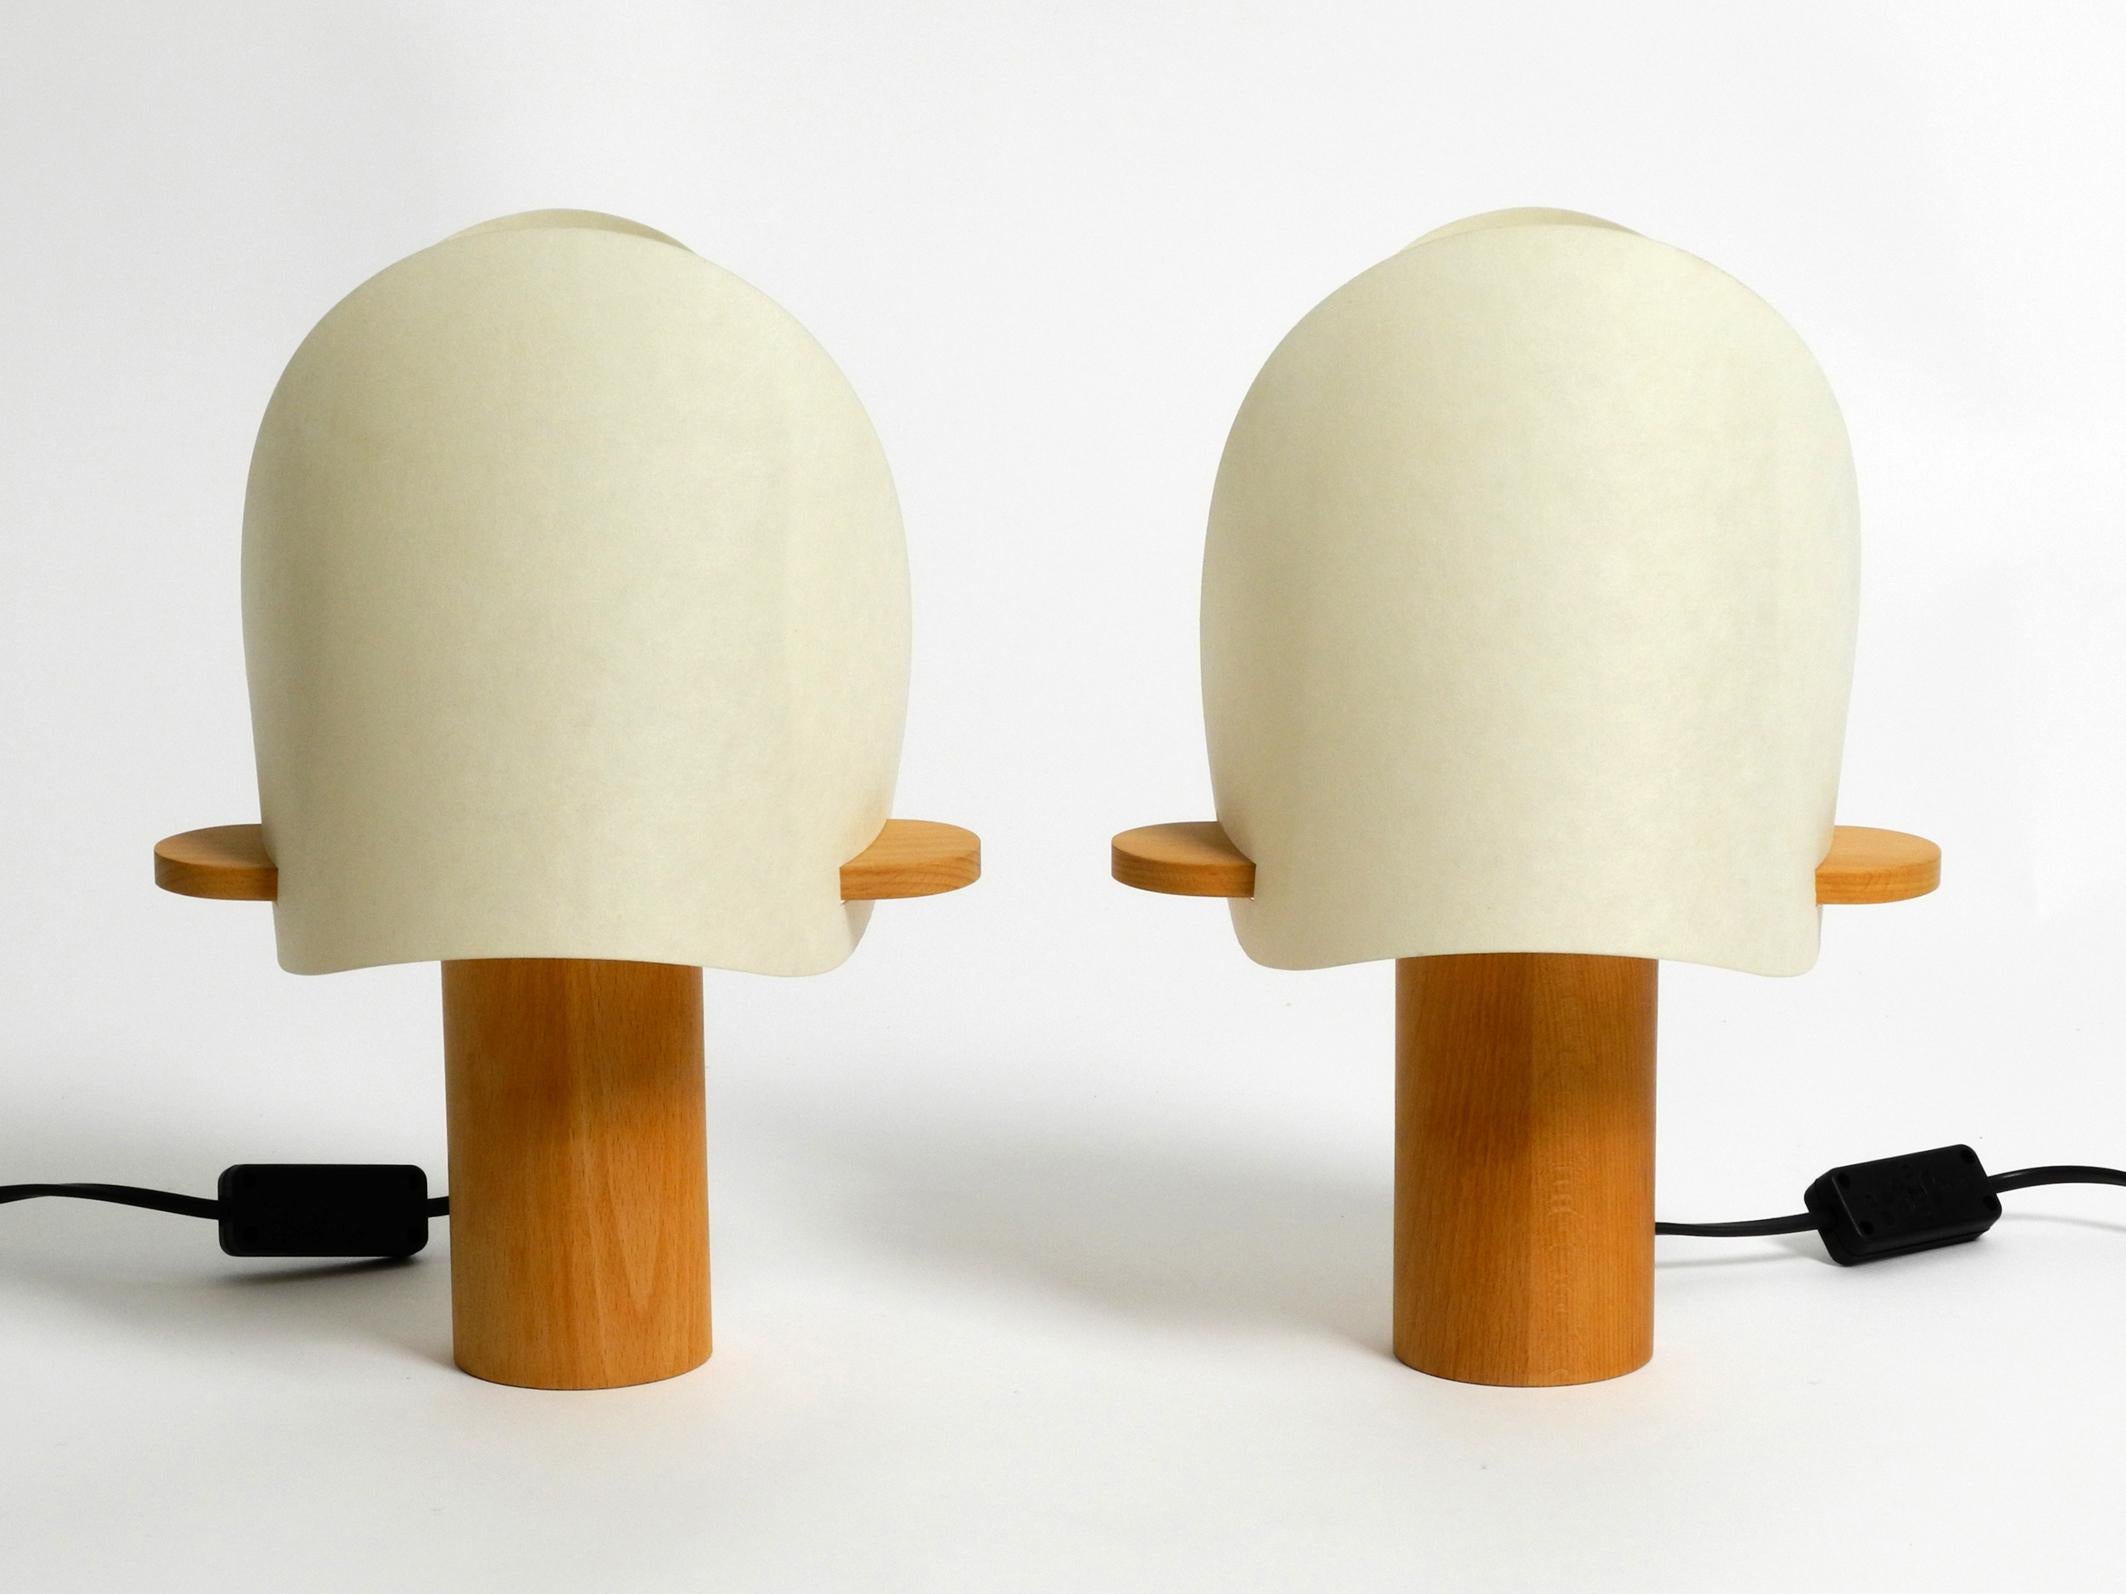 Two charming minimalist oak wood table lamps with Lunopal shades.
Great minimalist Postmodern design from the 80s.
With original label on the bottom. Type 7317. Made in Germany.
These table lamps are no longer produced by Domus.
The shade is